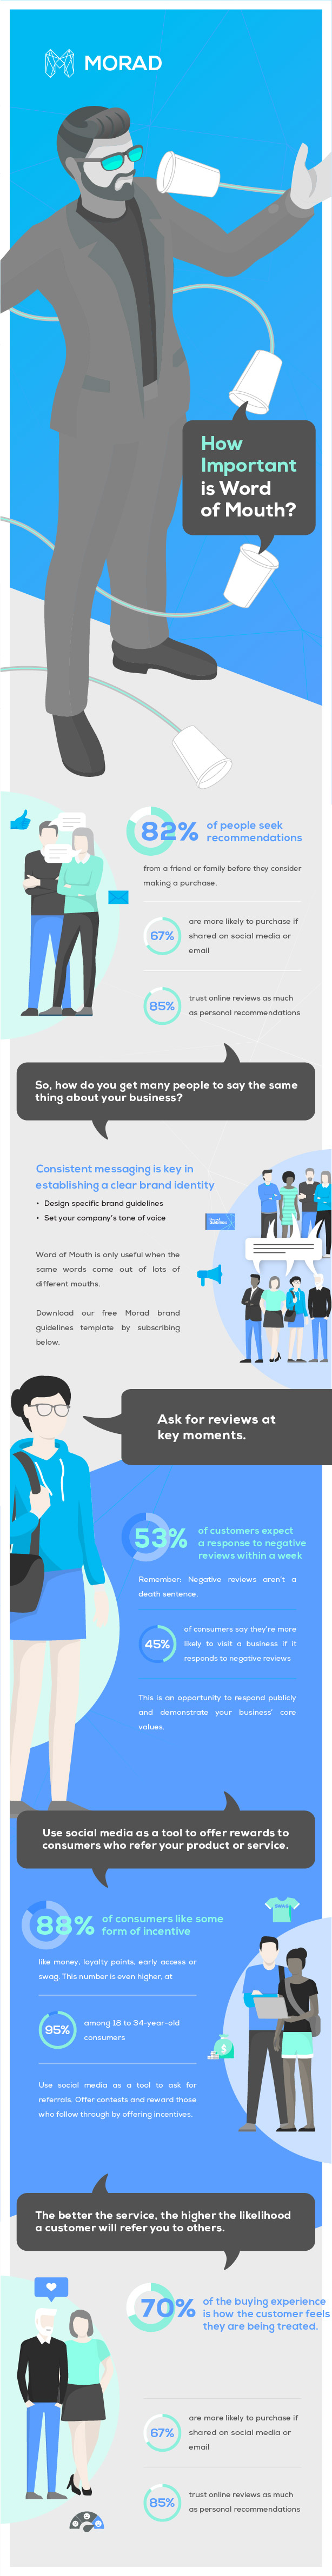 Infographic-Word-of-Mouth-Morad-01.jpg